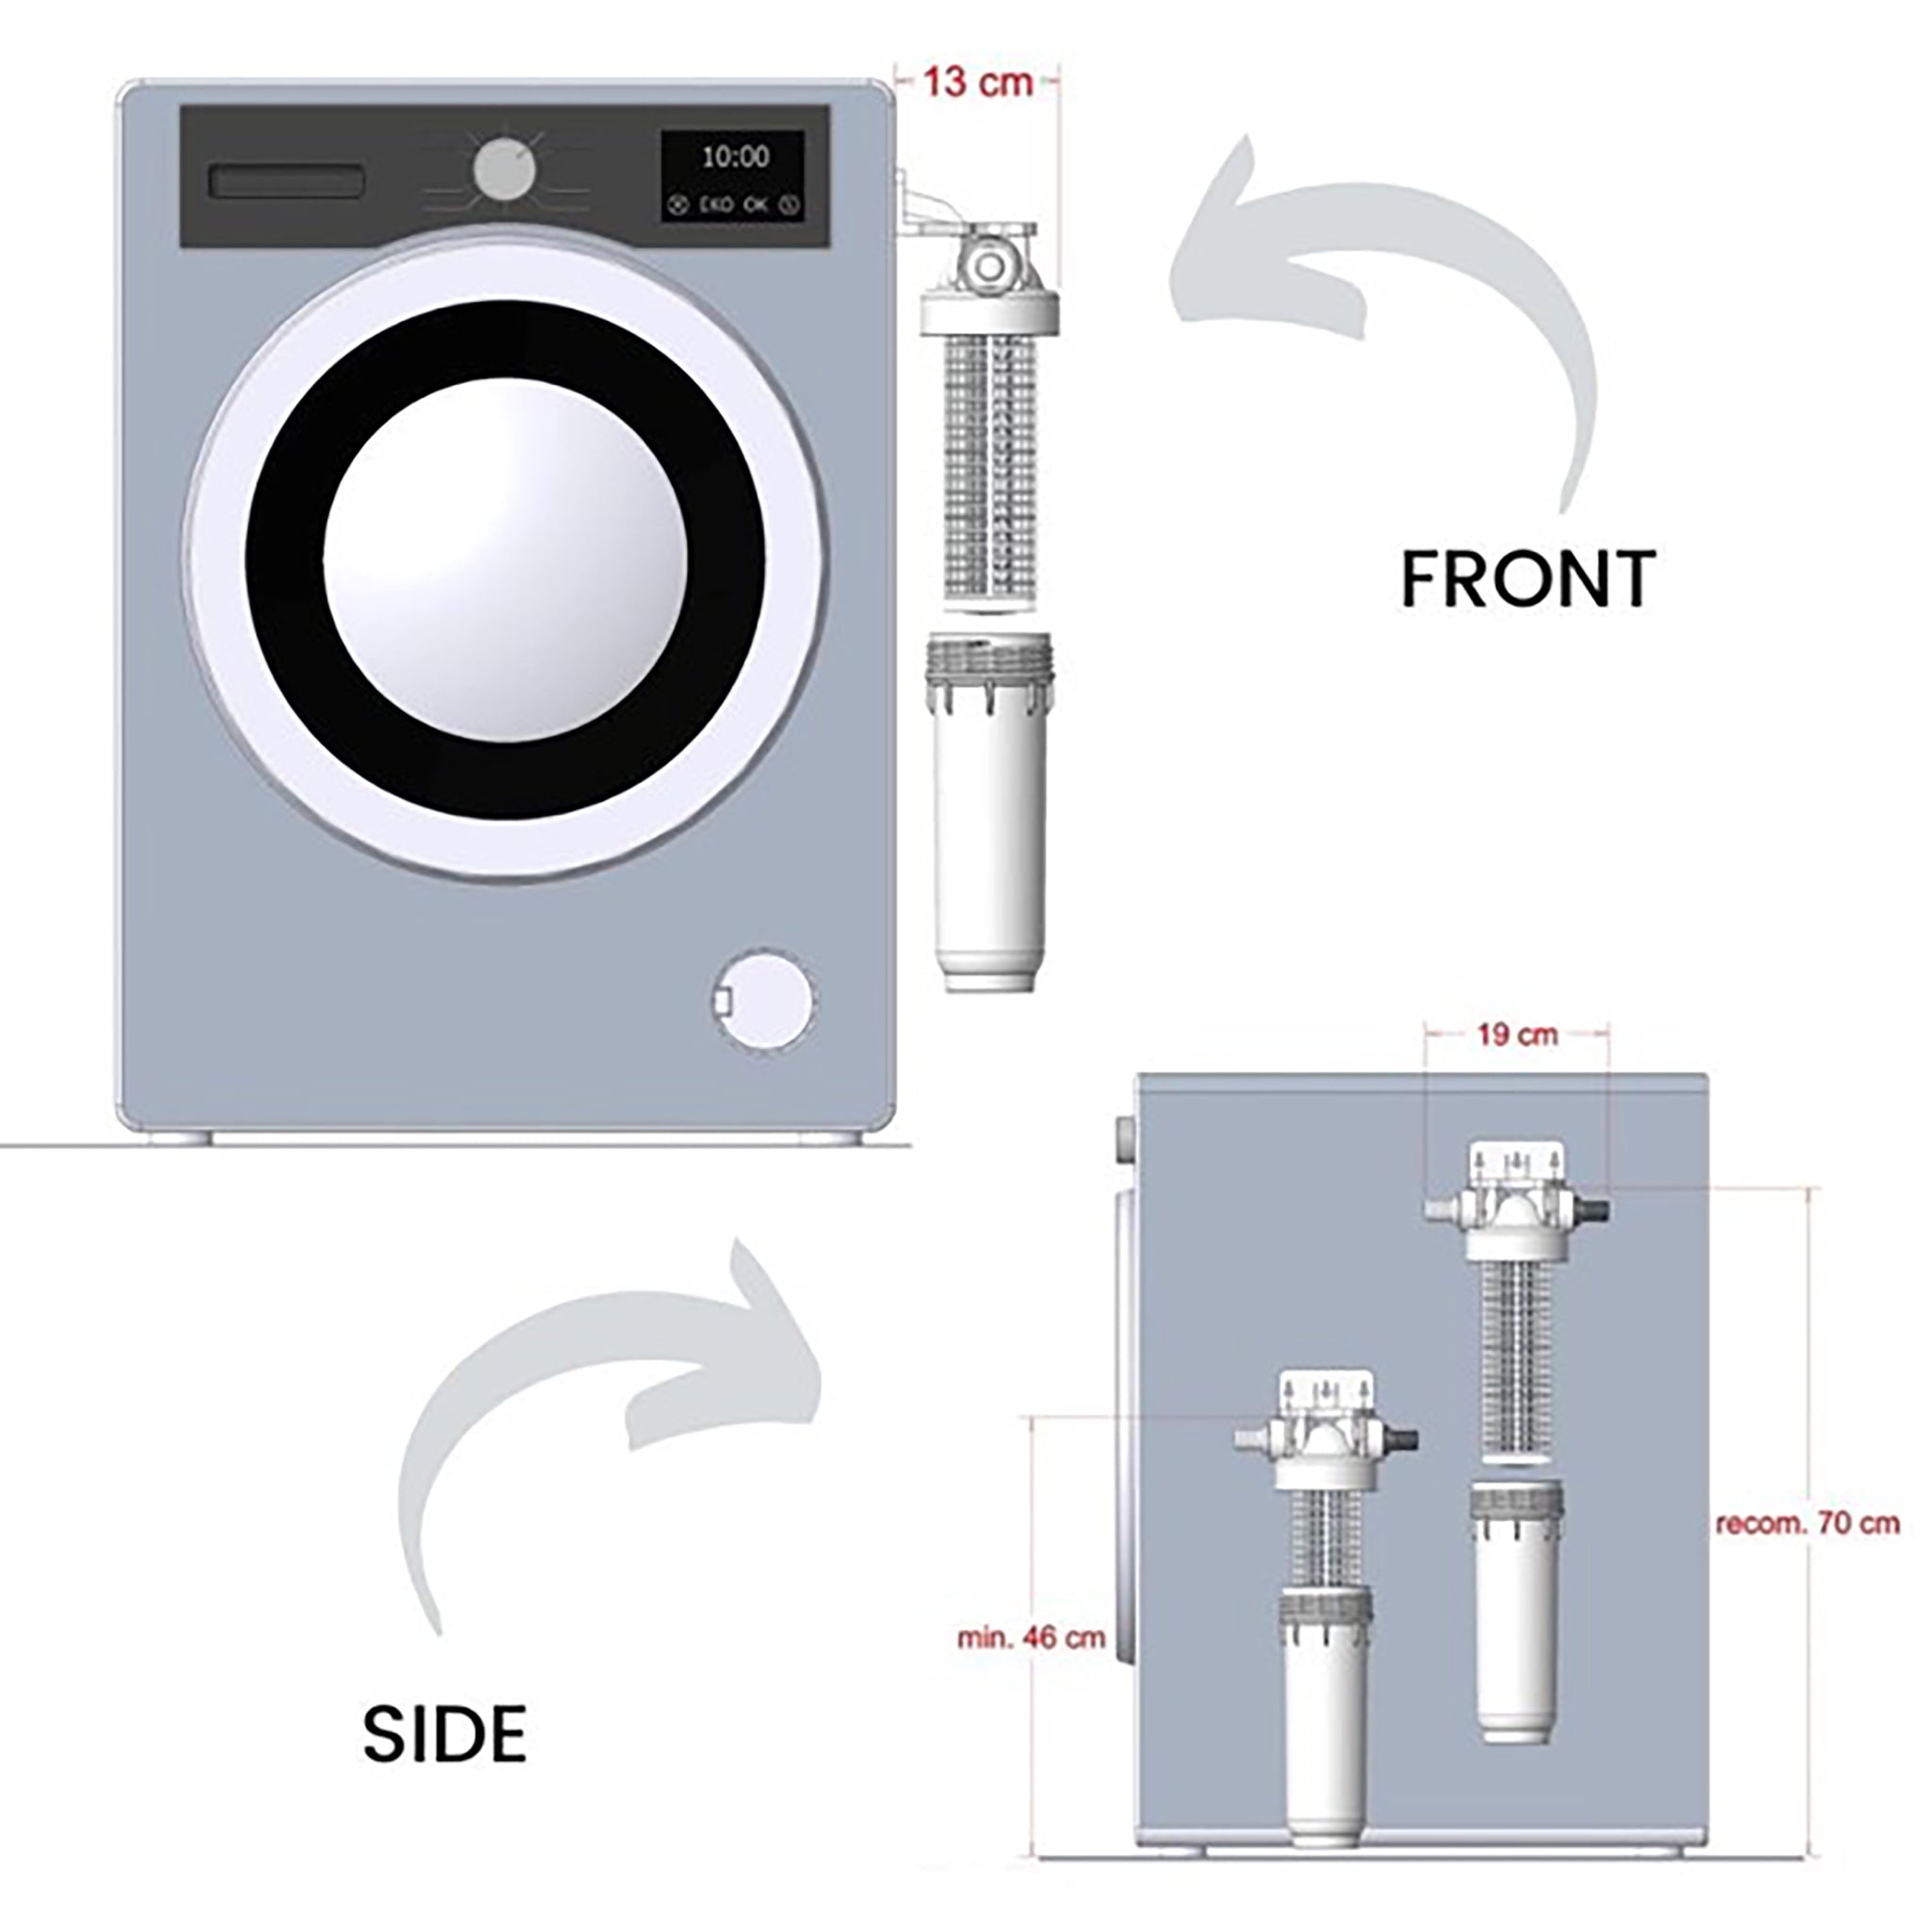 The dimensions of the PlanetCare Microfiber Filter housing